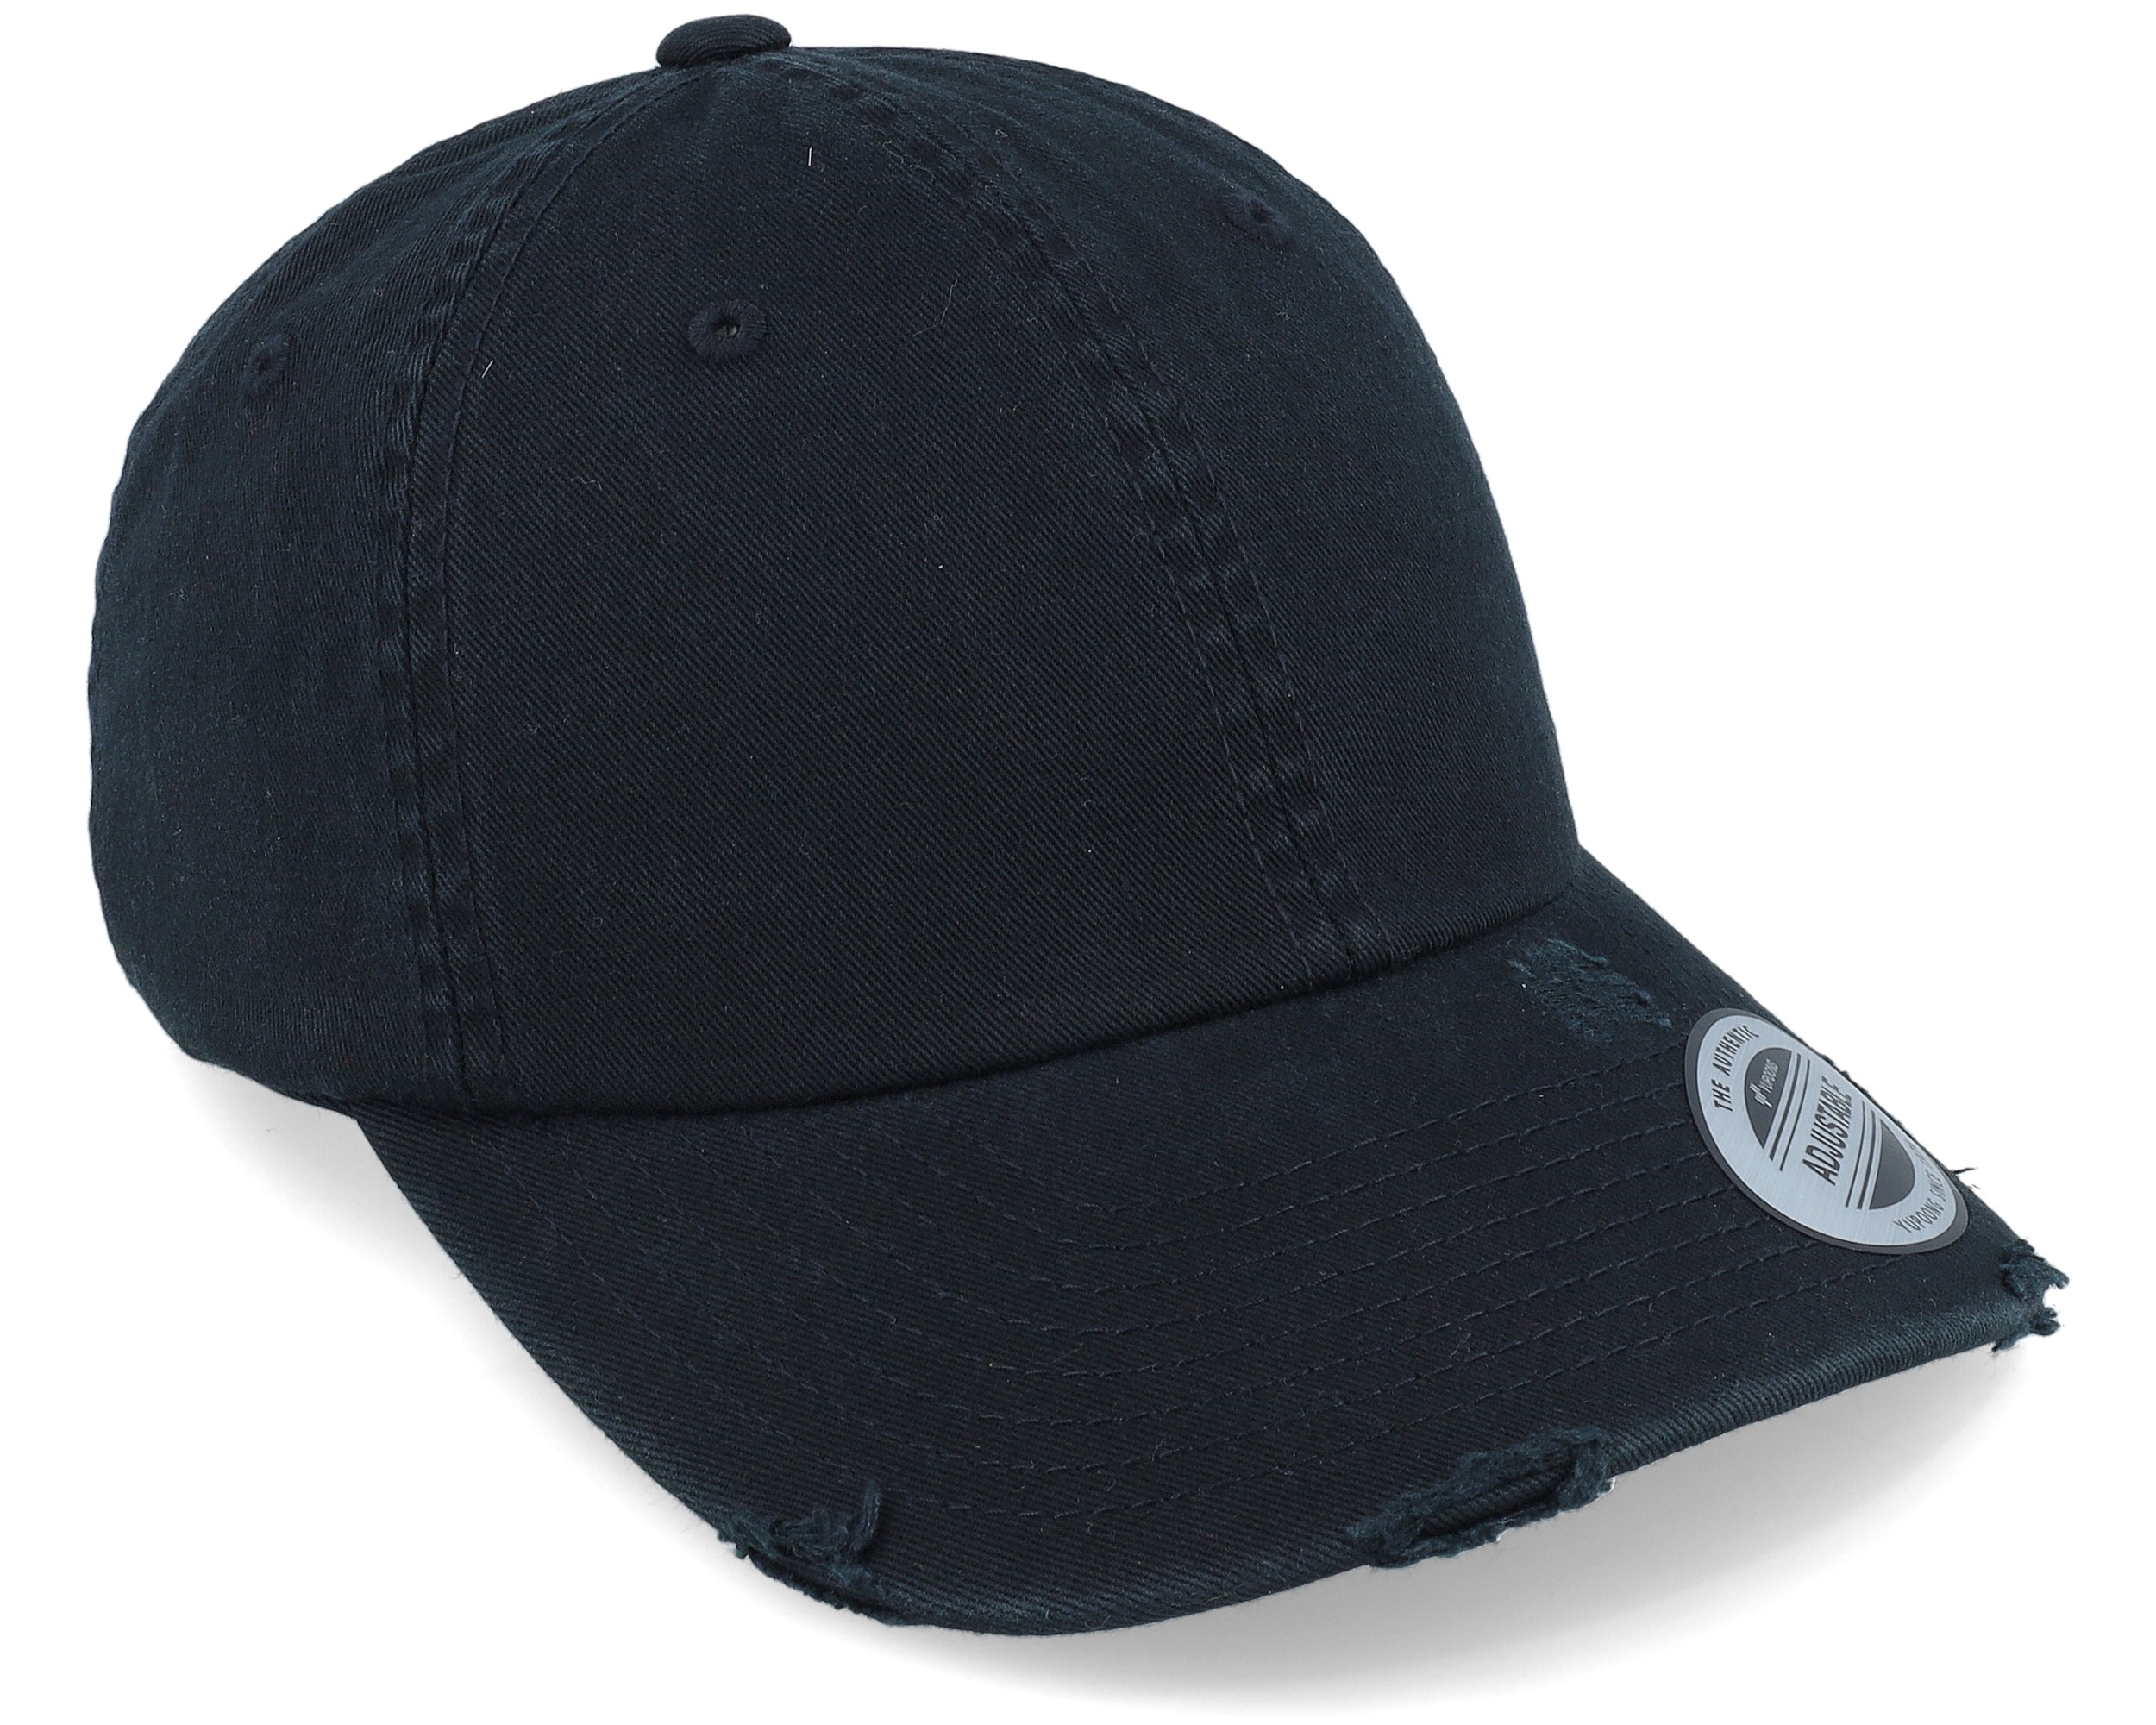 Dad Cap Ripped Black Adjustable - Yupoong caps | Hatstore.co.uk